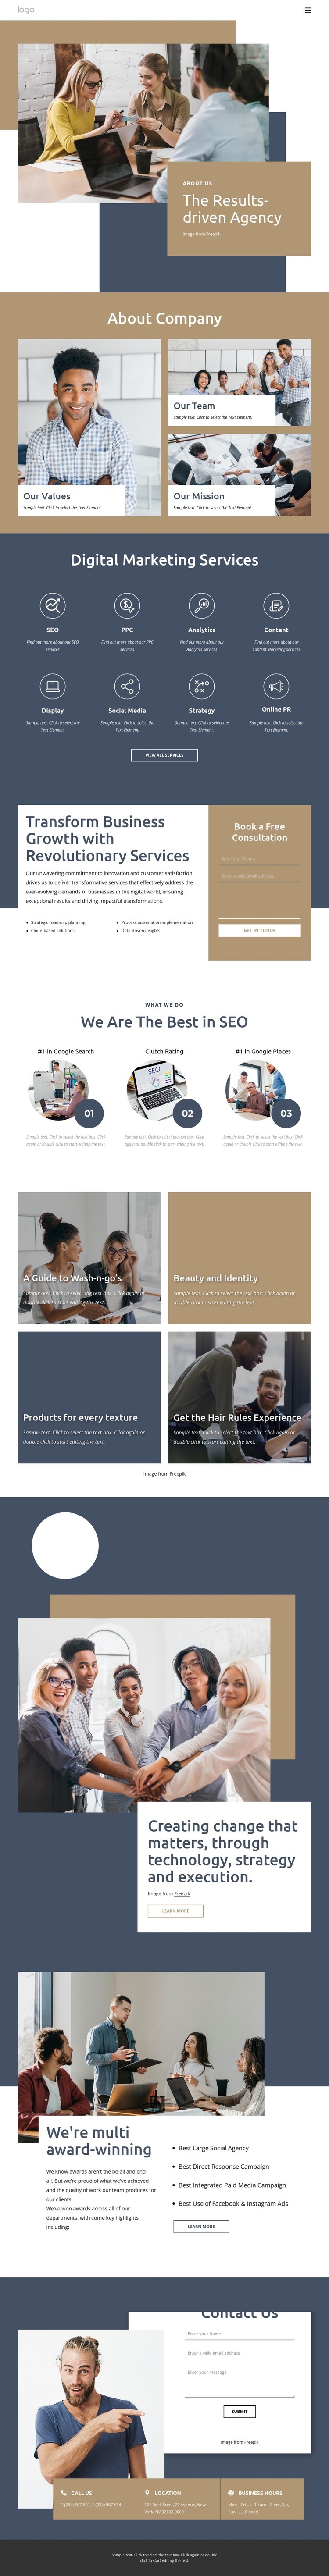 The results-driven agency Web Page Design